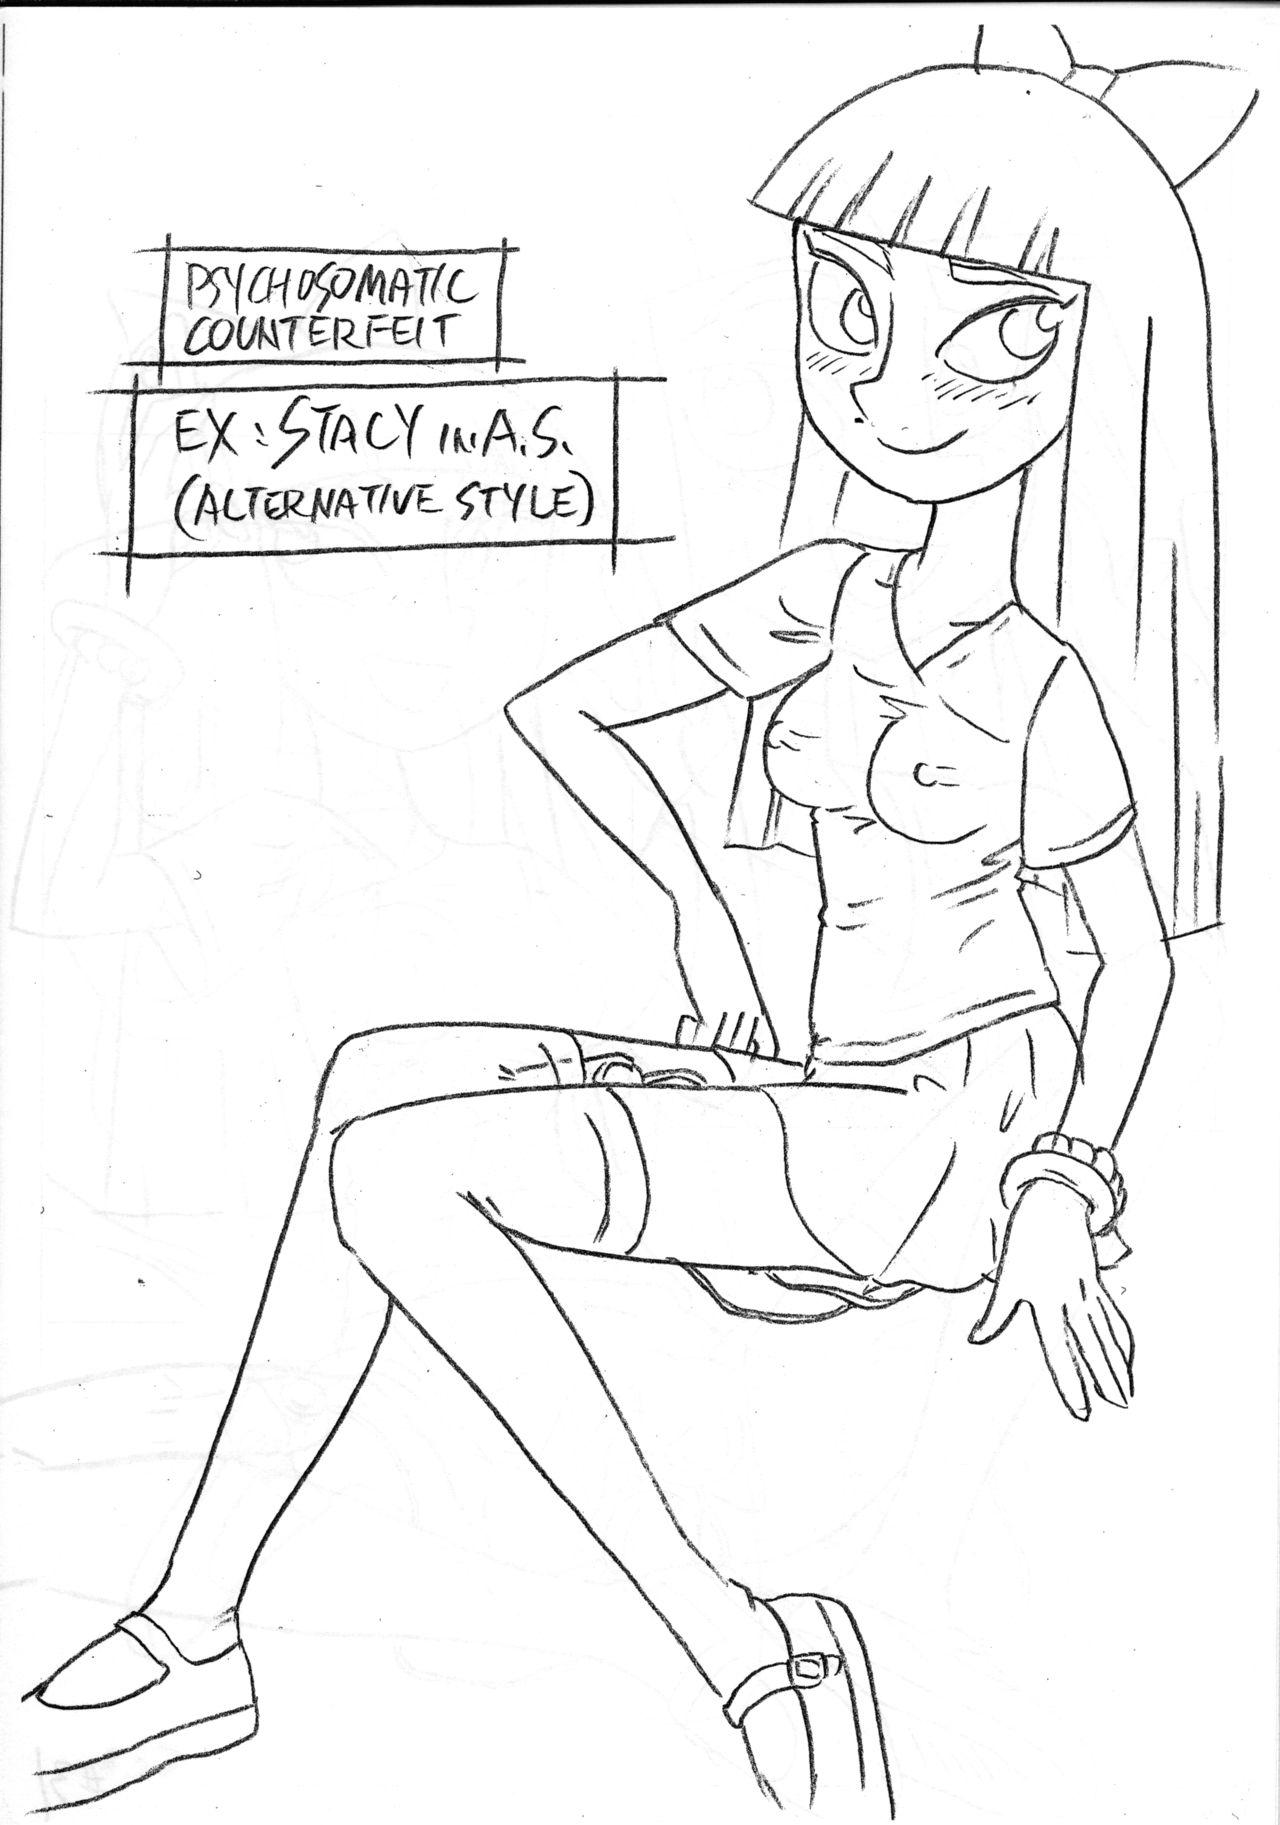 Gang Bang Psychosomatic Counterfeit Ex: Stacy in A.S. - Phineas and ferb Ass Worship - Page 31